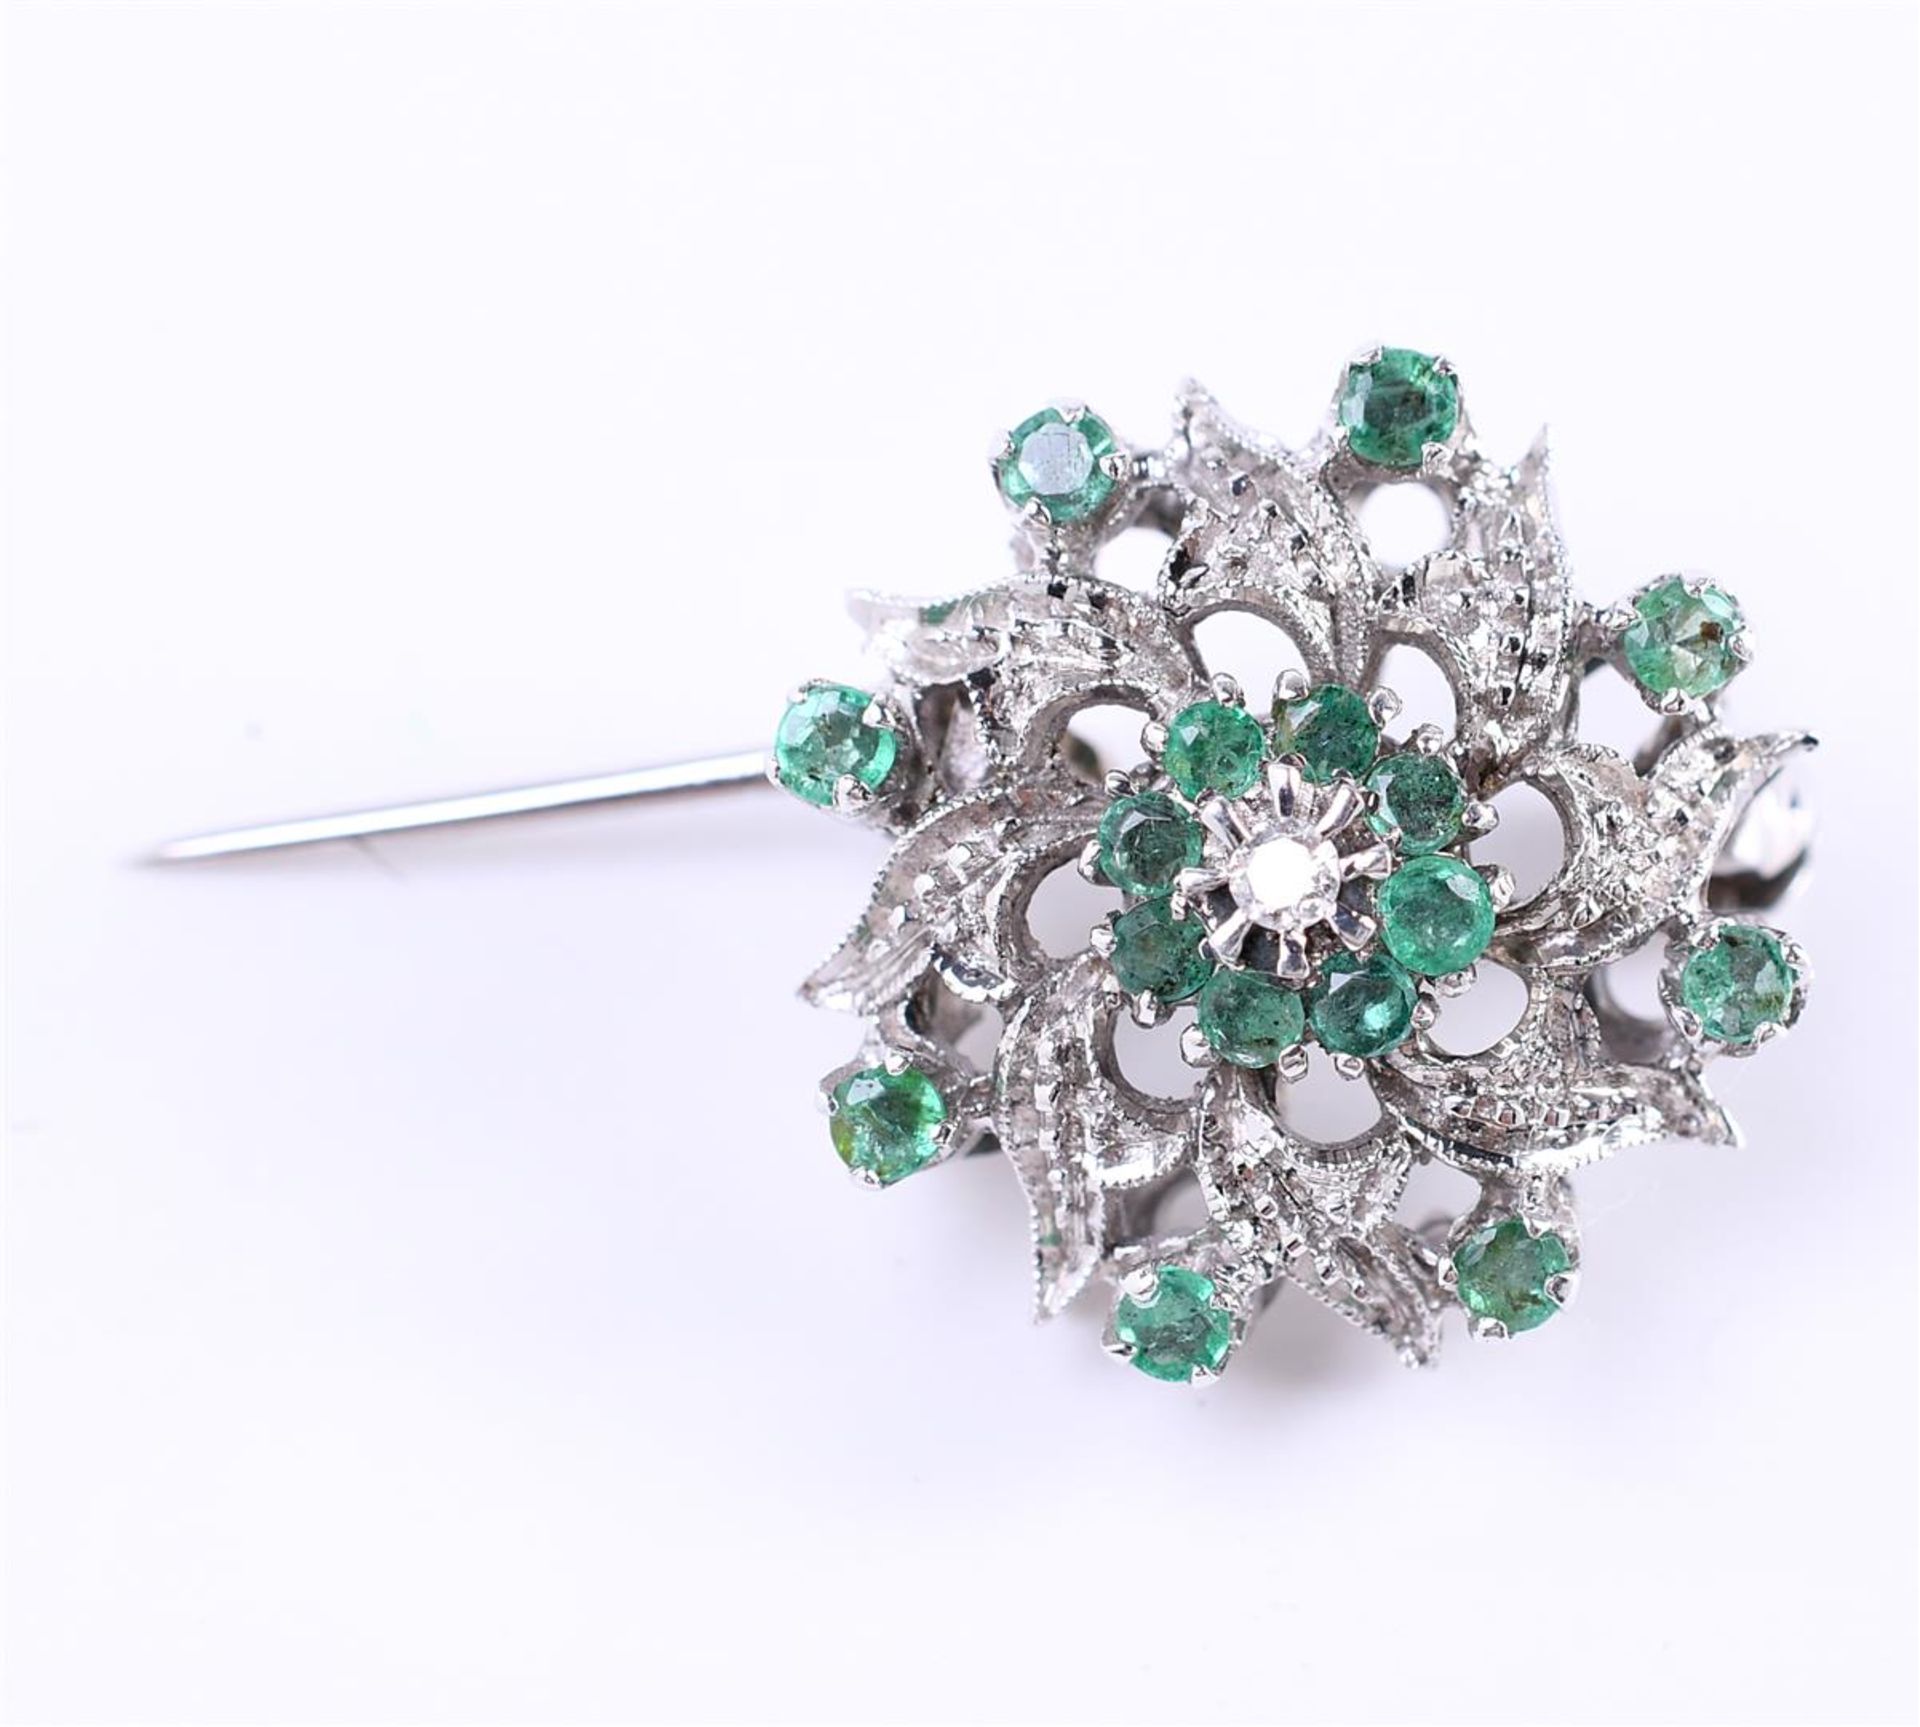 18 carat white gold cluster brooch, set with approximately 16 brilliant cut emeralds - Bild 3 aus 5